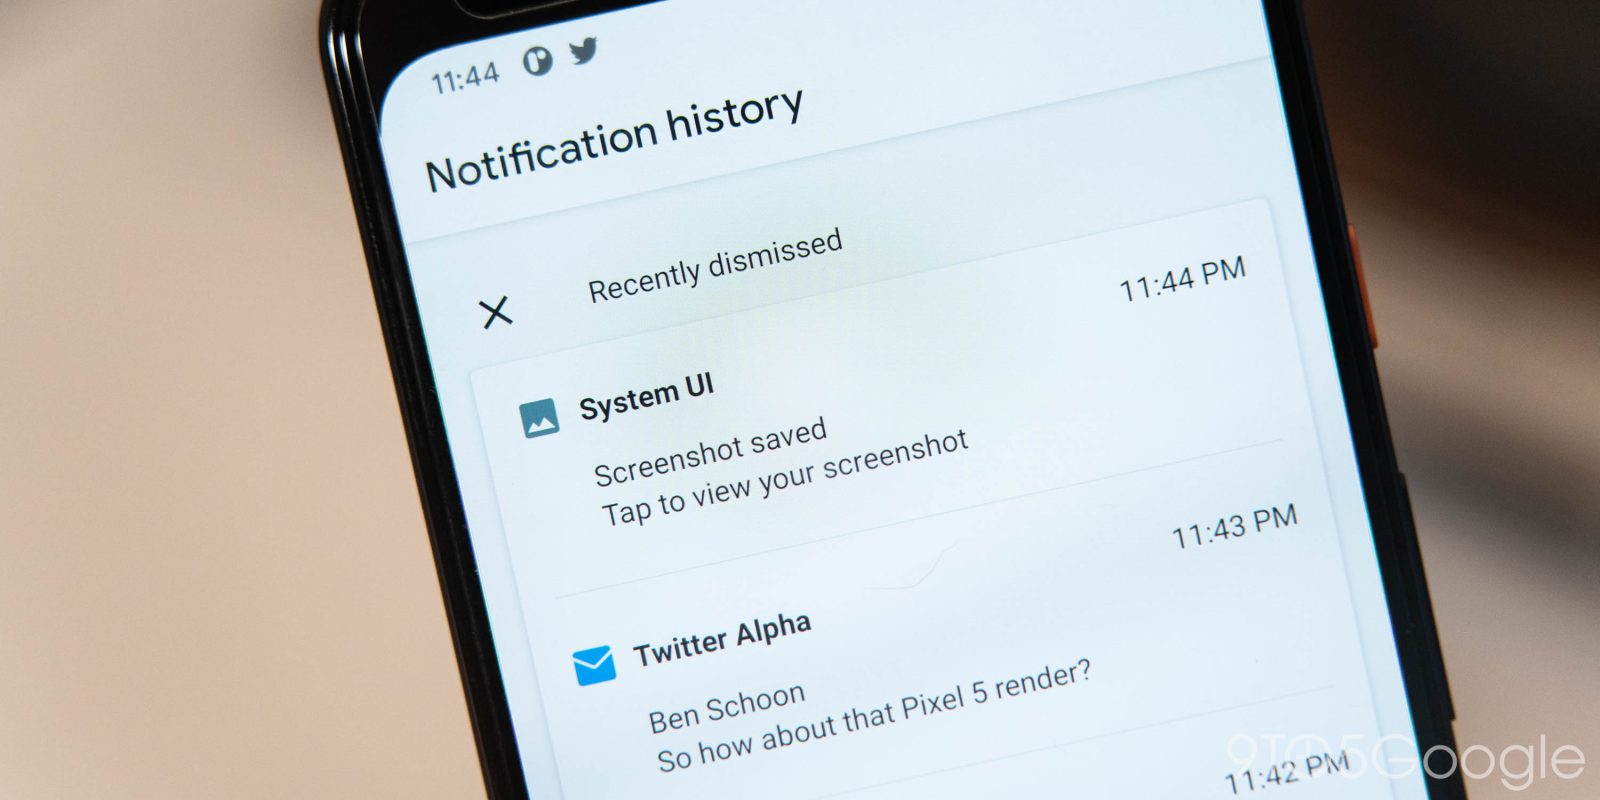 Android 11 to bring needed 'Notification history' revamp - 9to5Google